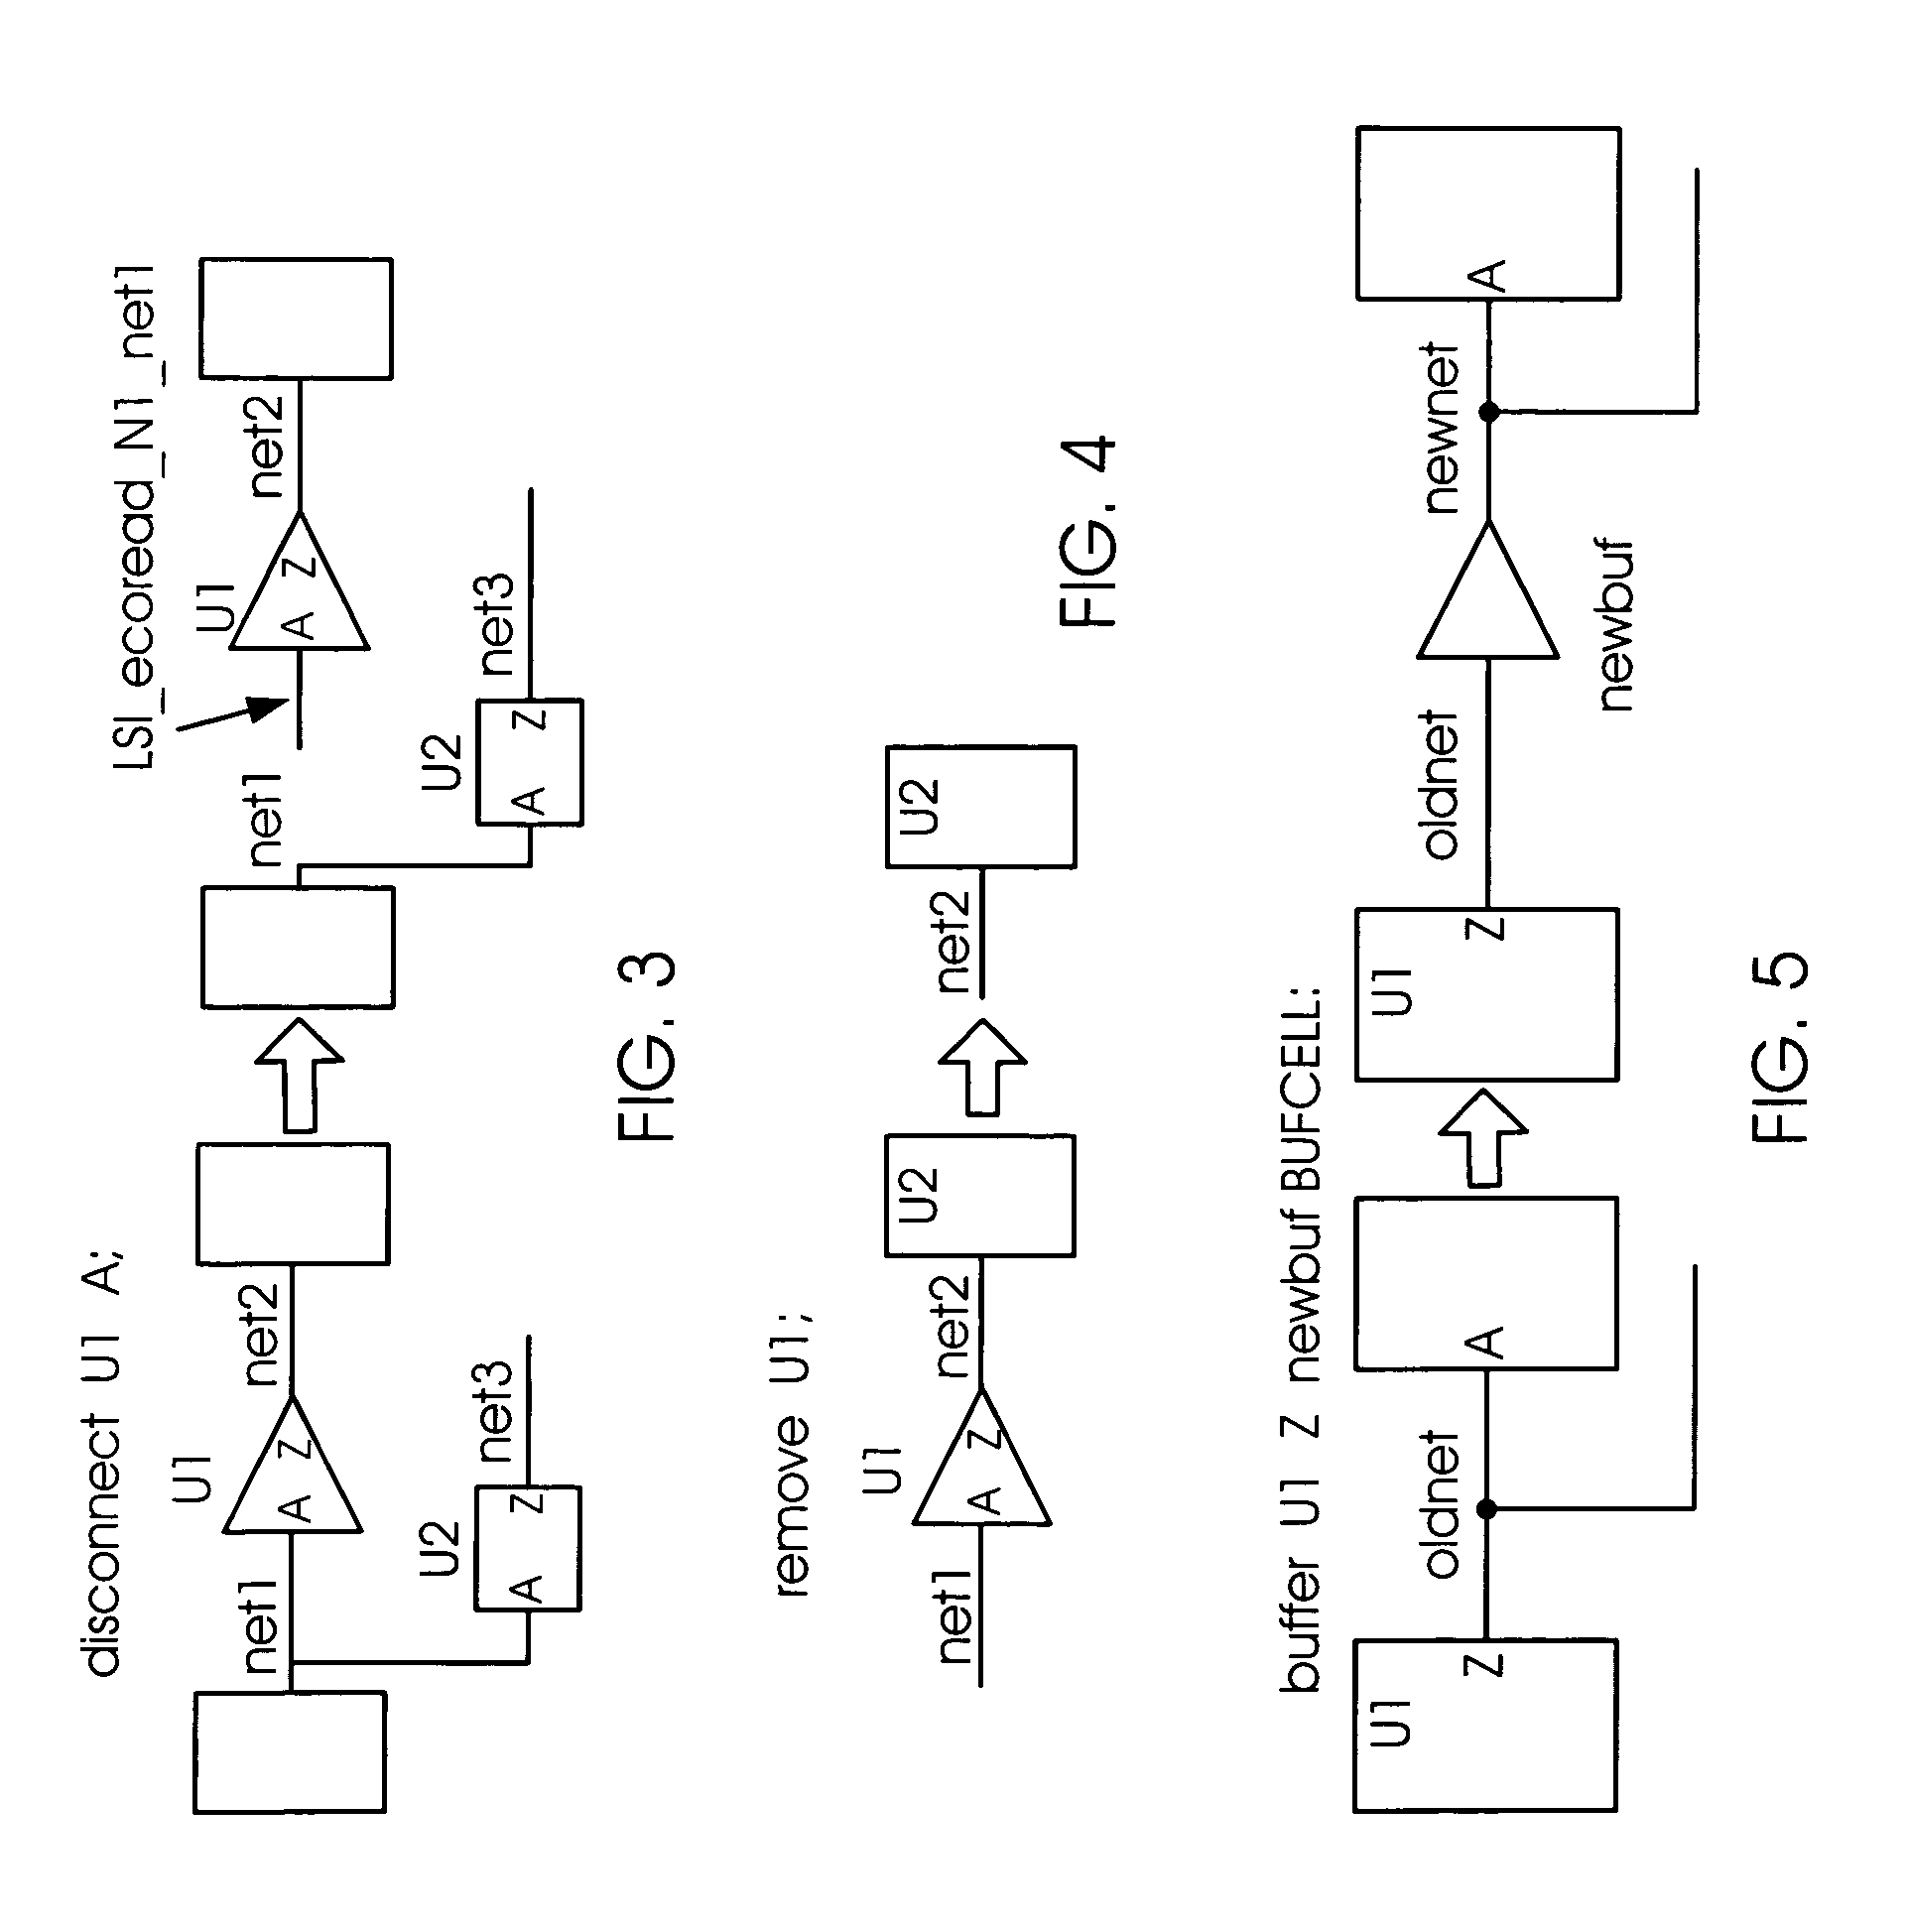 Method and apparatus for implementing engineering change orders